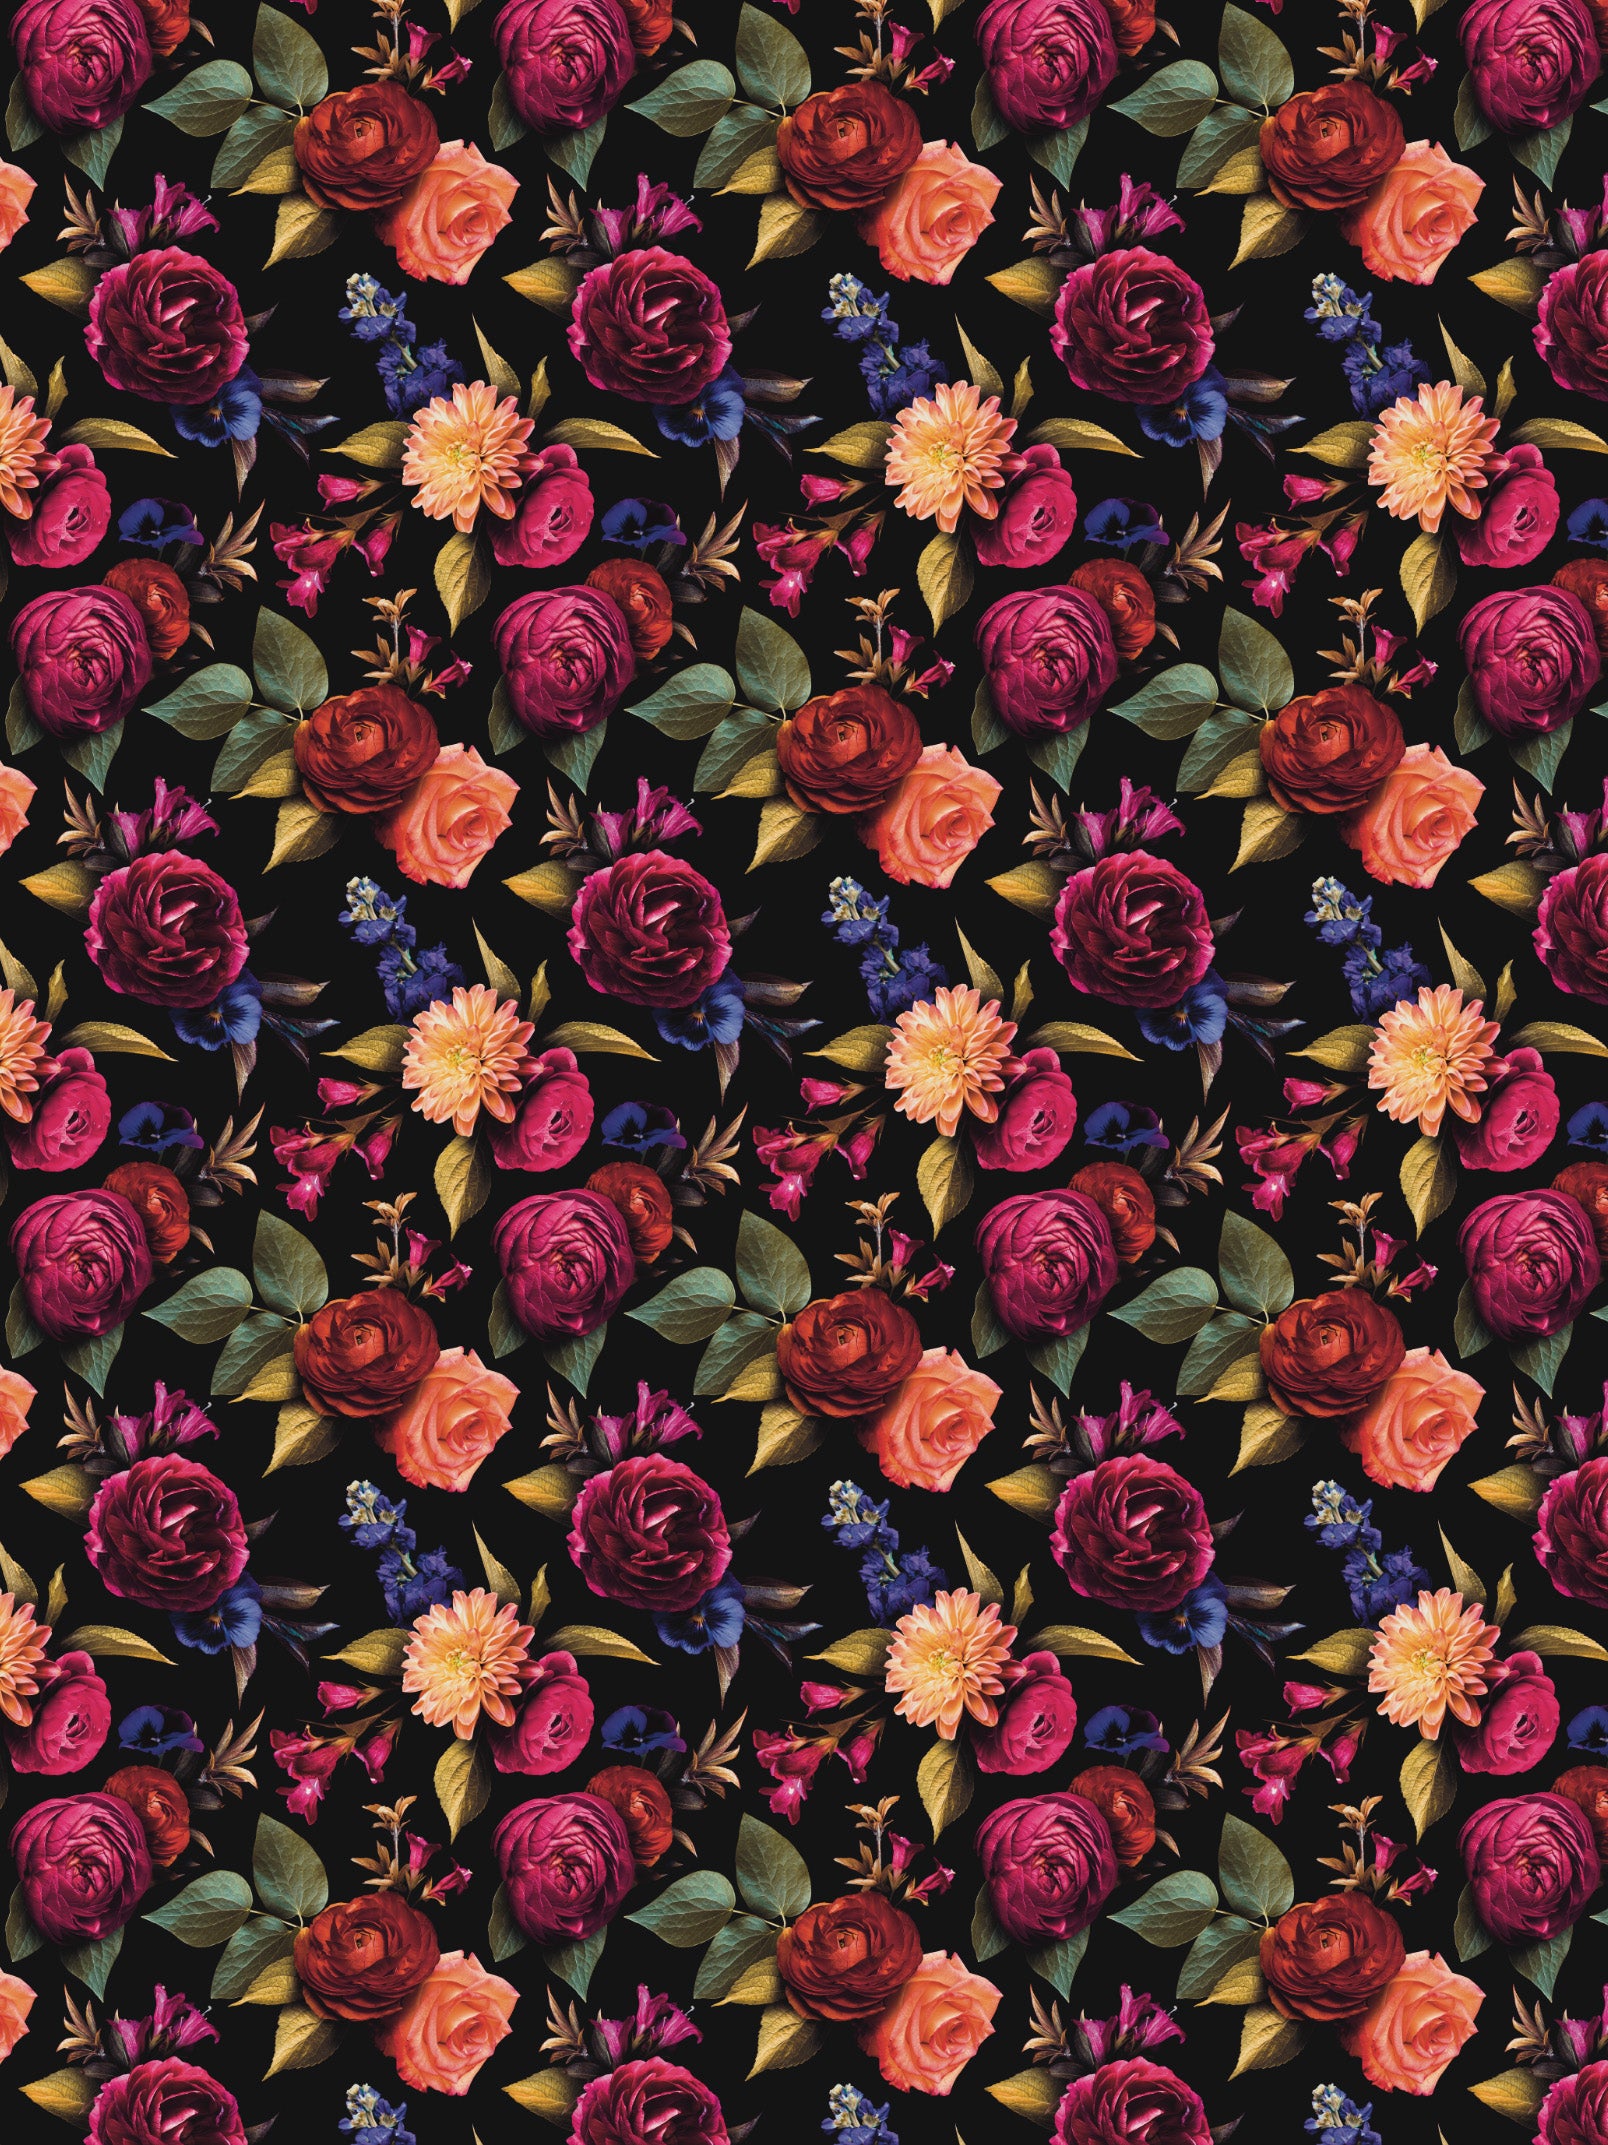 Image Transfers - RF10 Realistic Floral Deep Pink Textured Florals